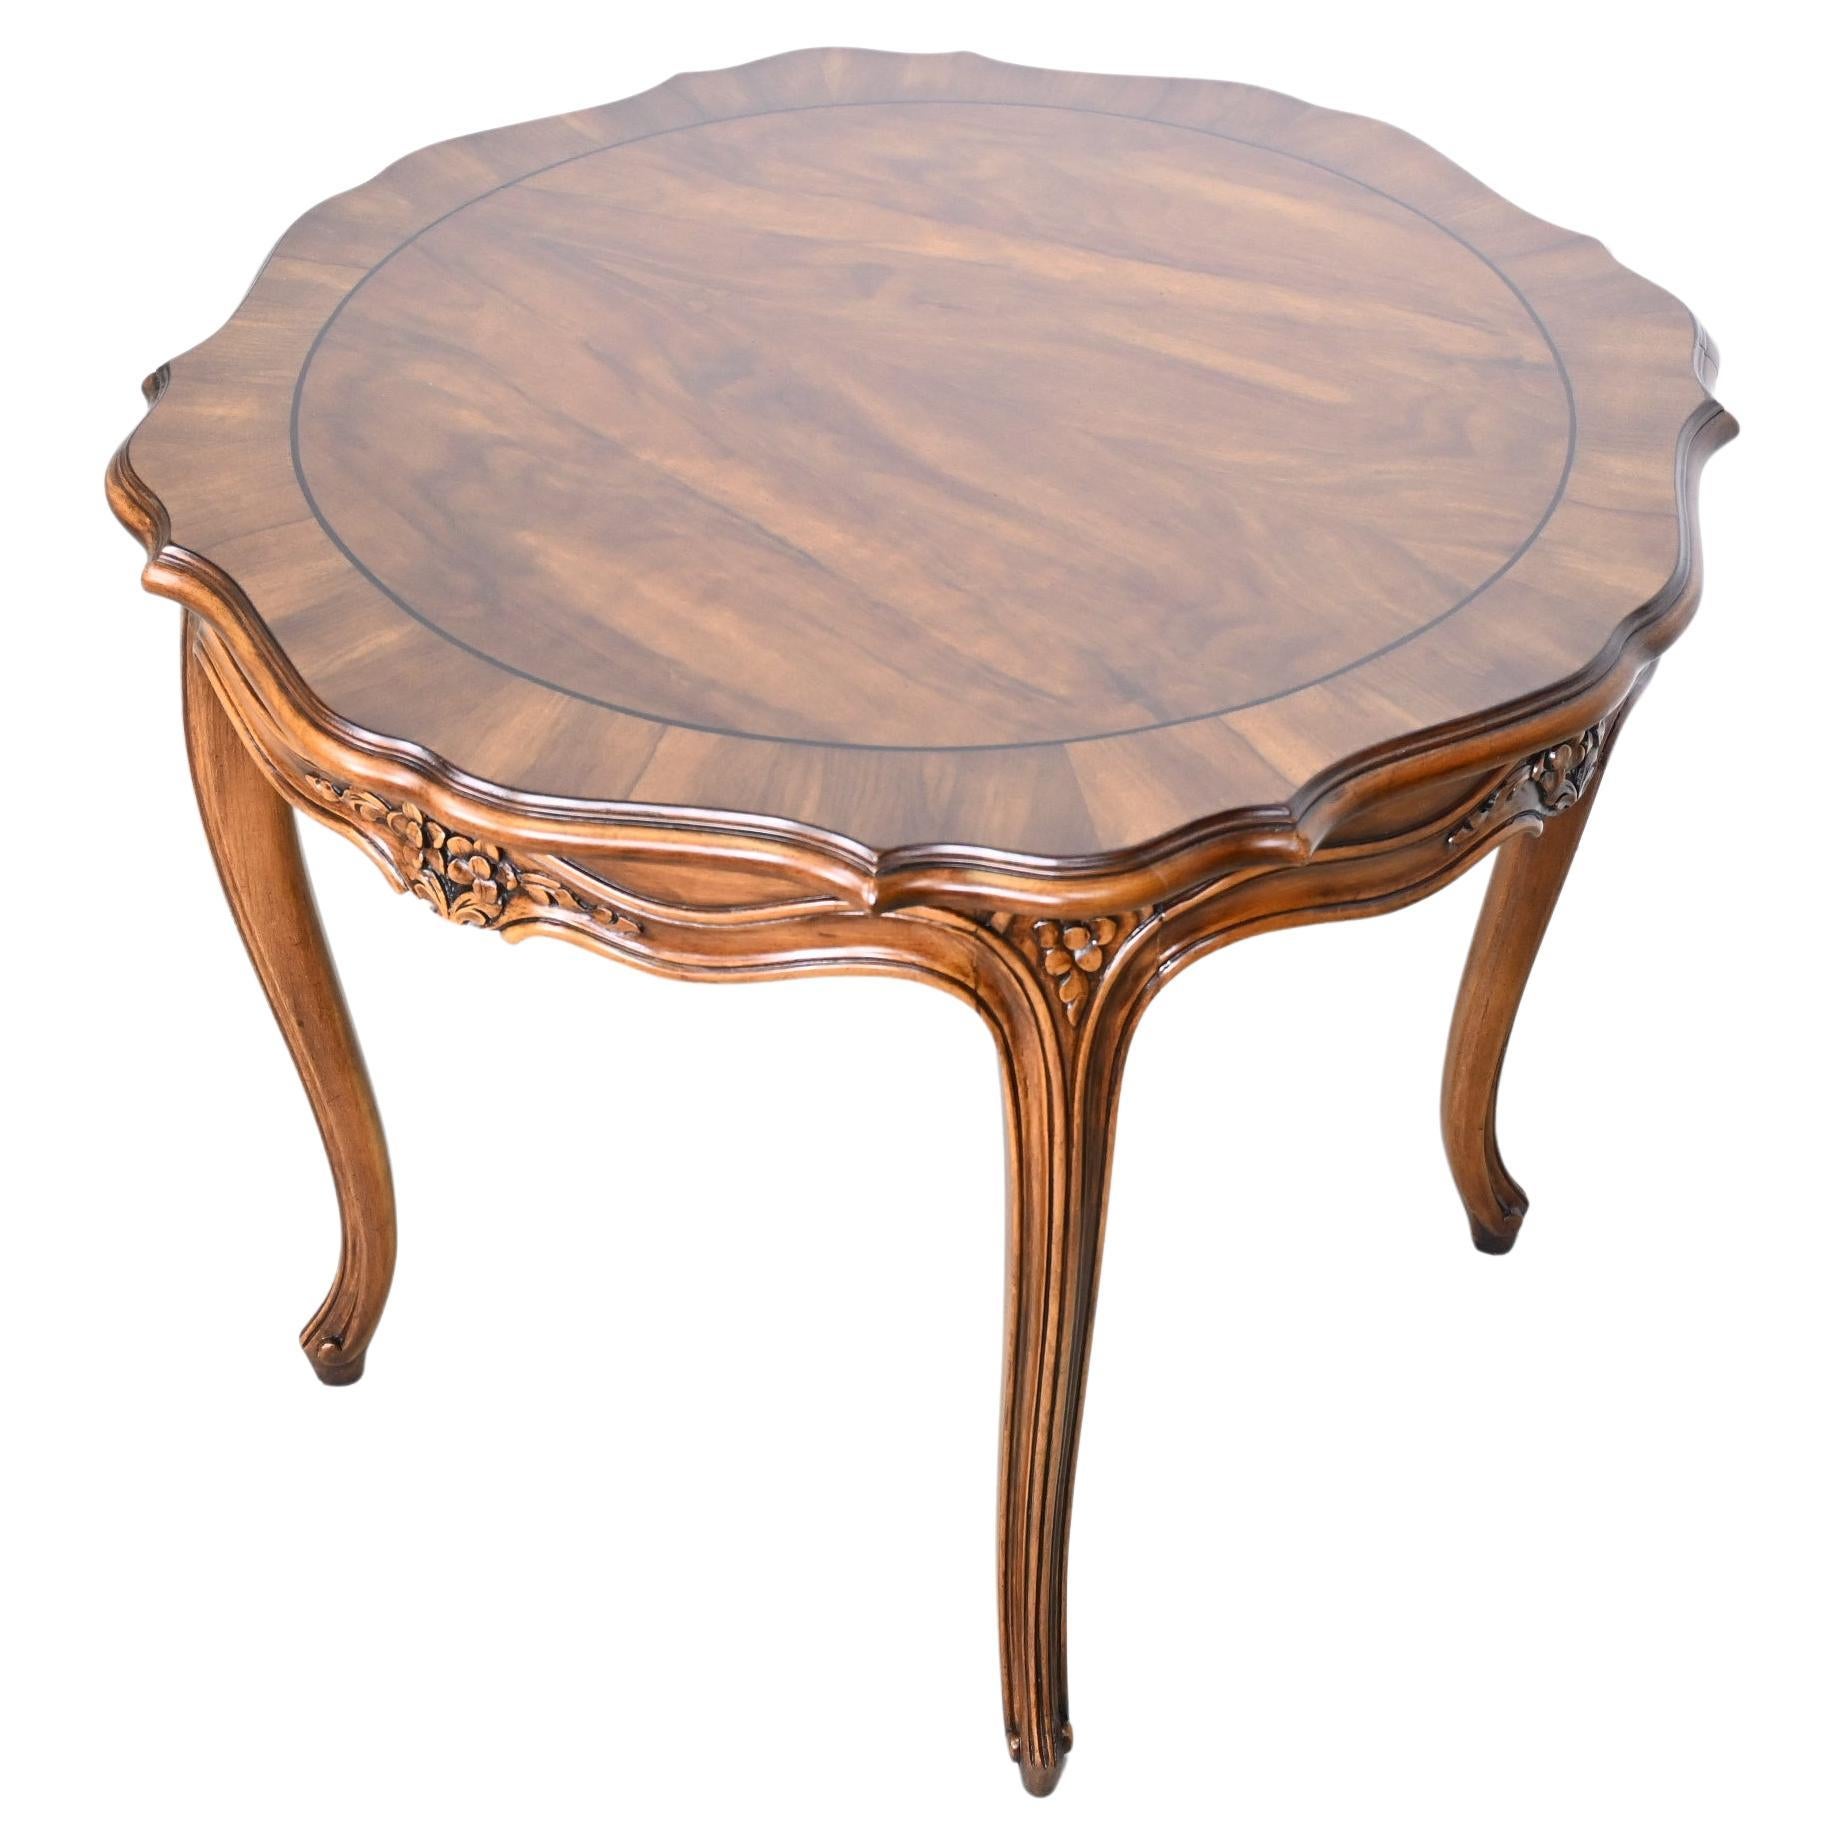 Karges Furniture French Provincial Side Table